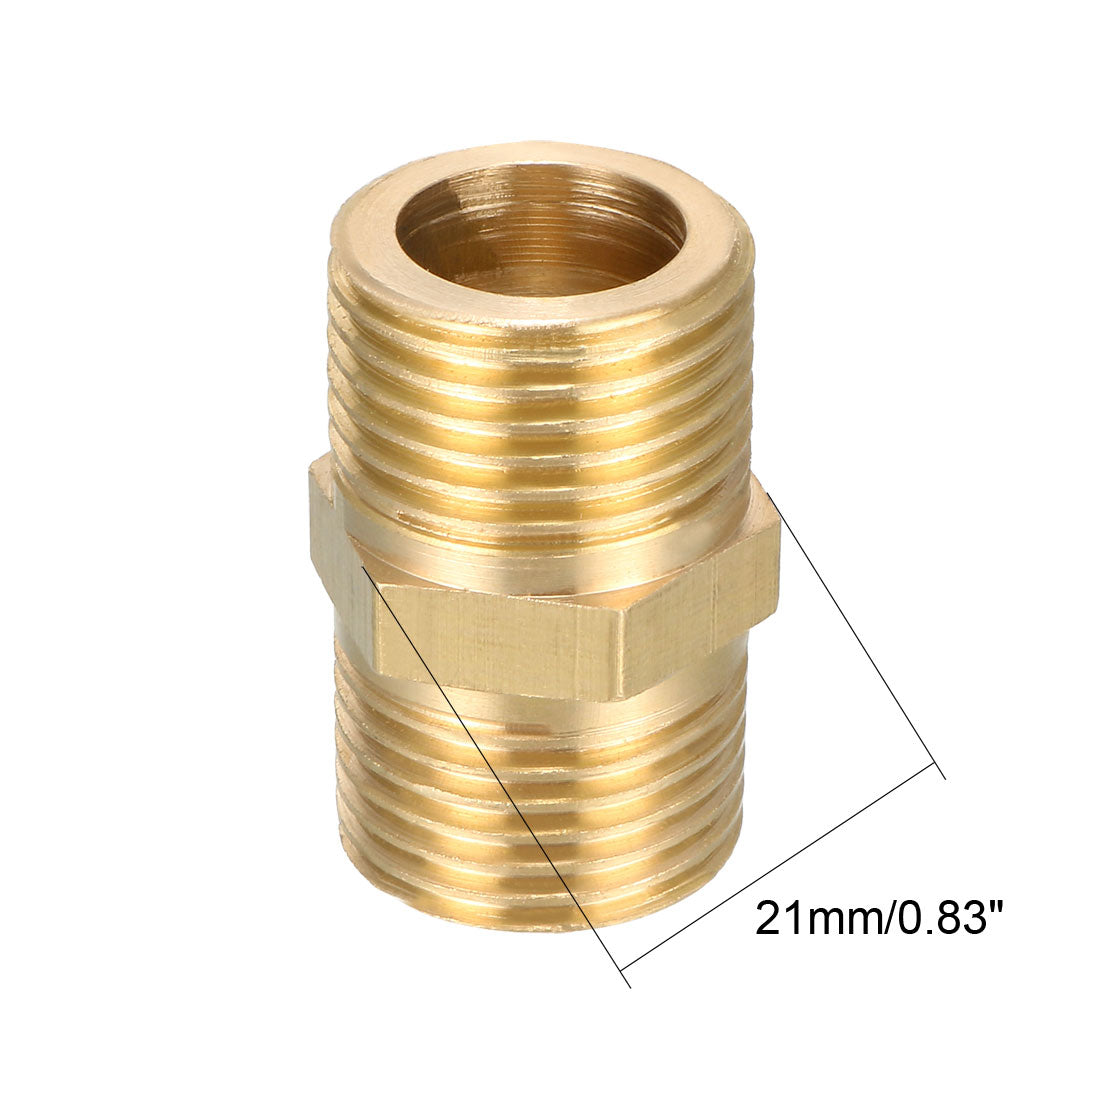 uxcell Uxcell Brass Pipe Fitting Hex Bushing 1/2 BSP Male x 1/2 BSP Male Thread Connector 5pcs